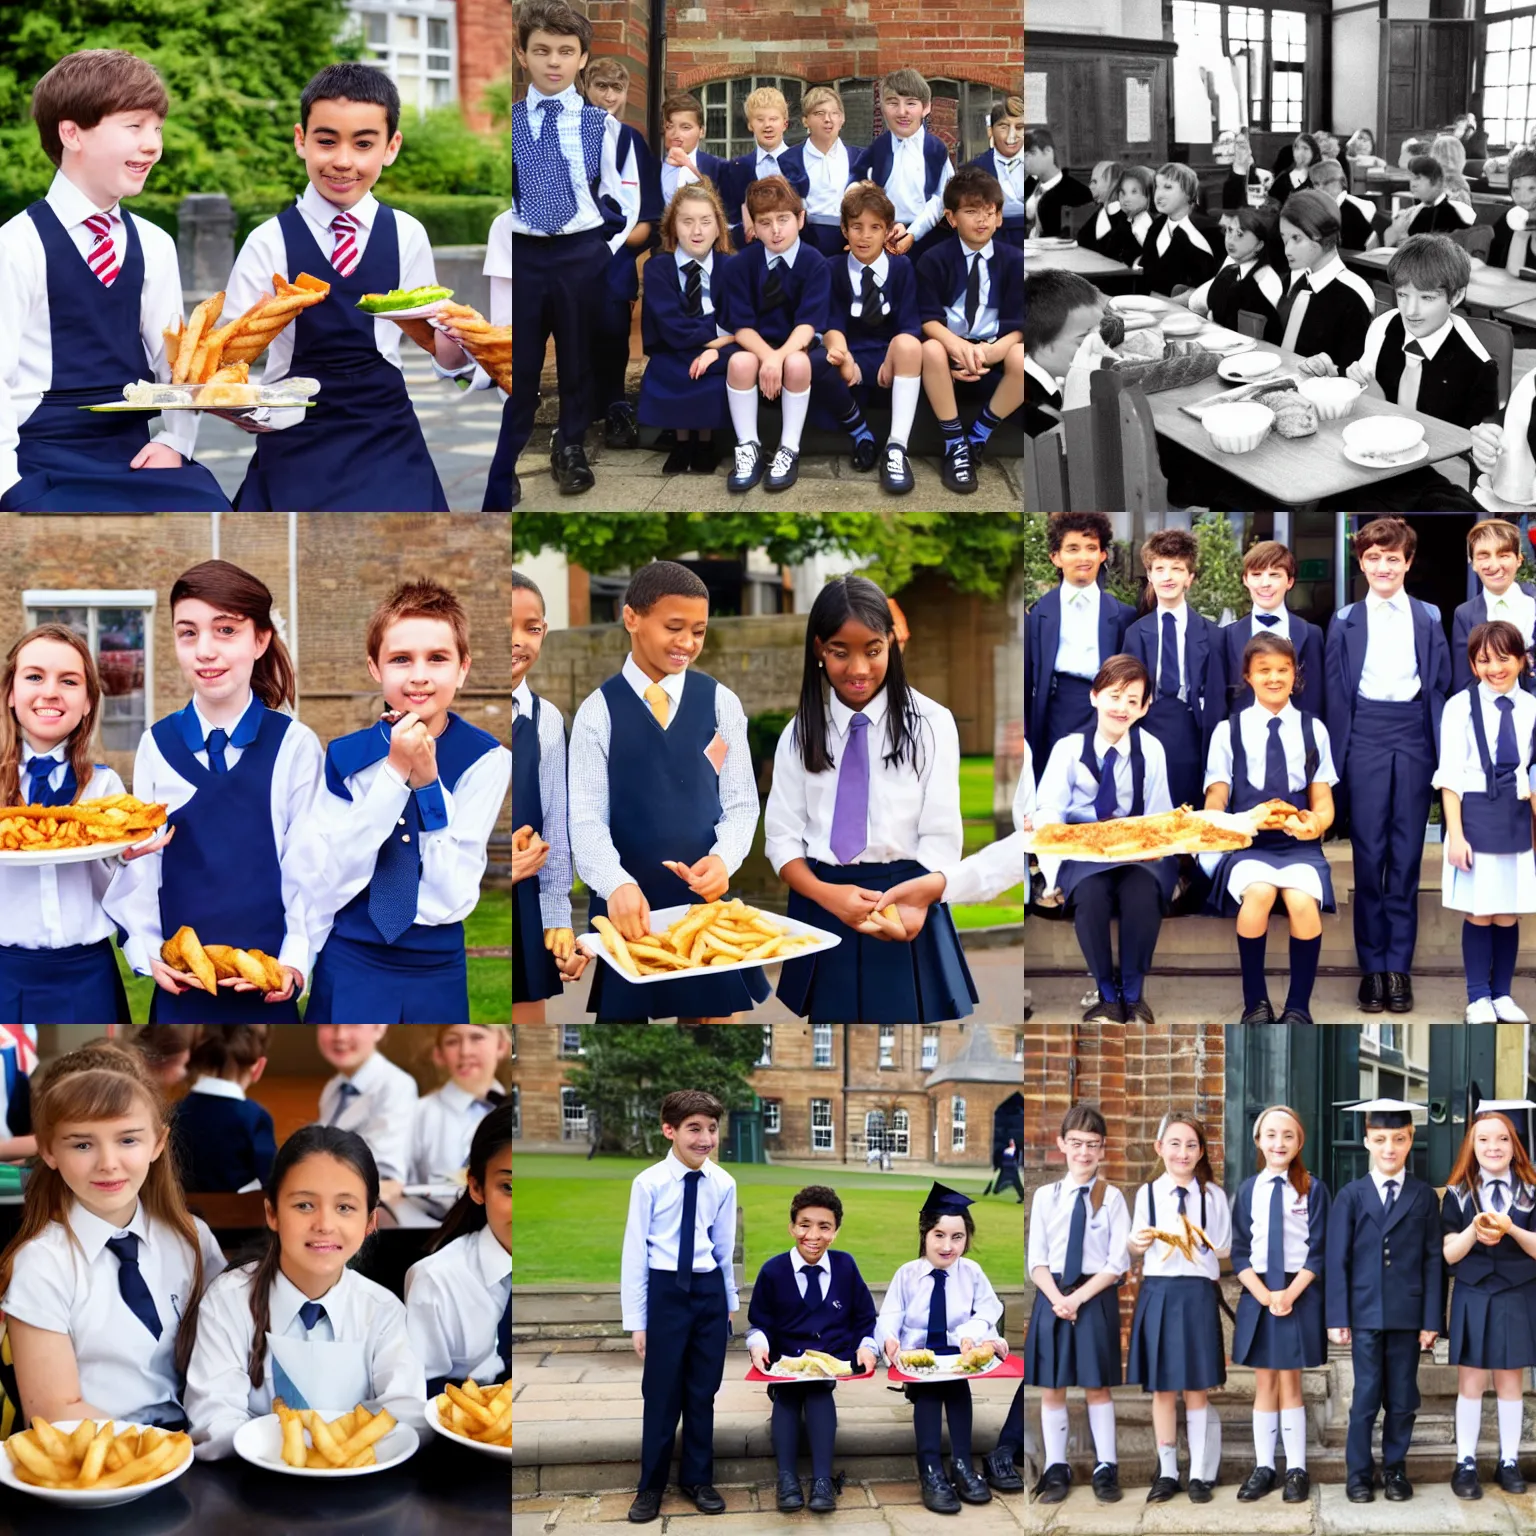 Prompt: Students at a posh British public school, wearing formal school uniform, eating fish and chips